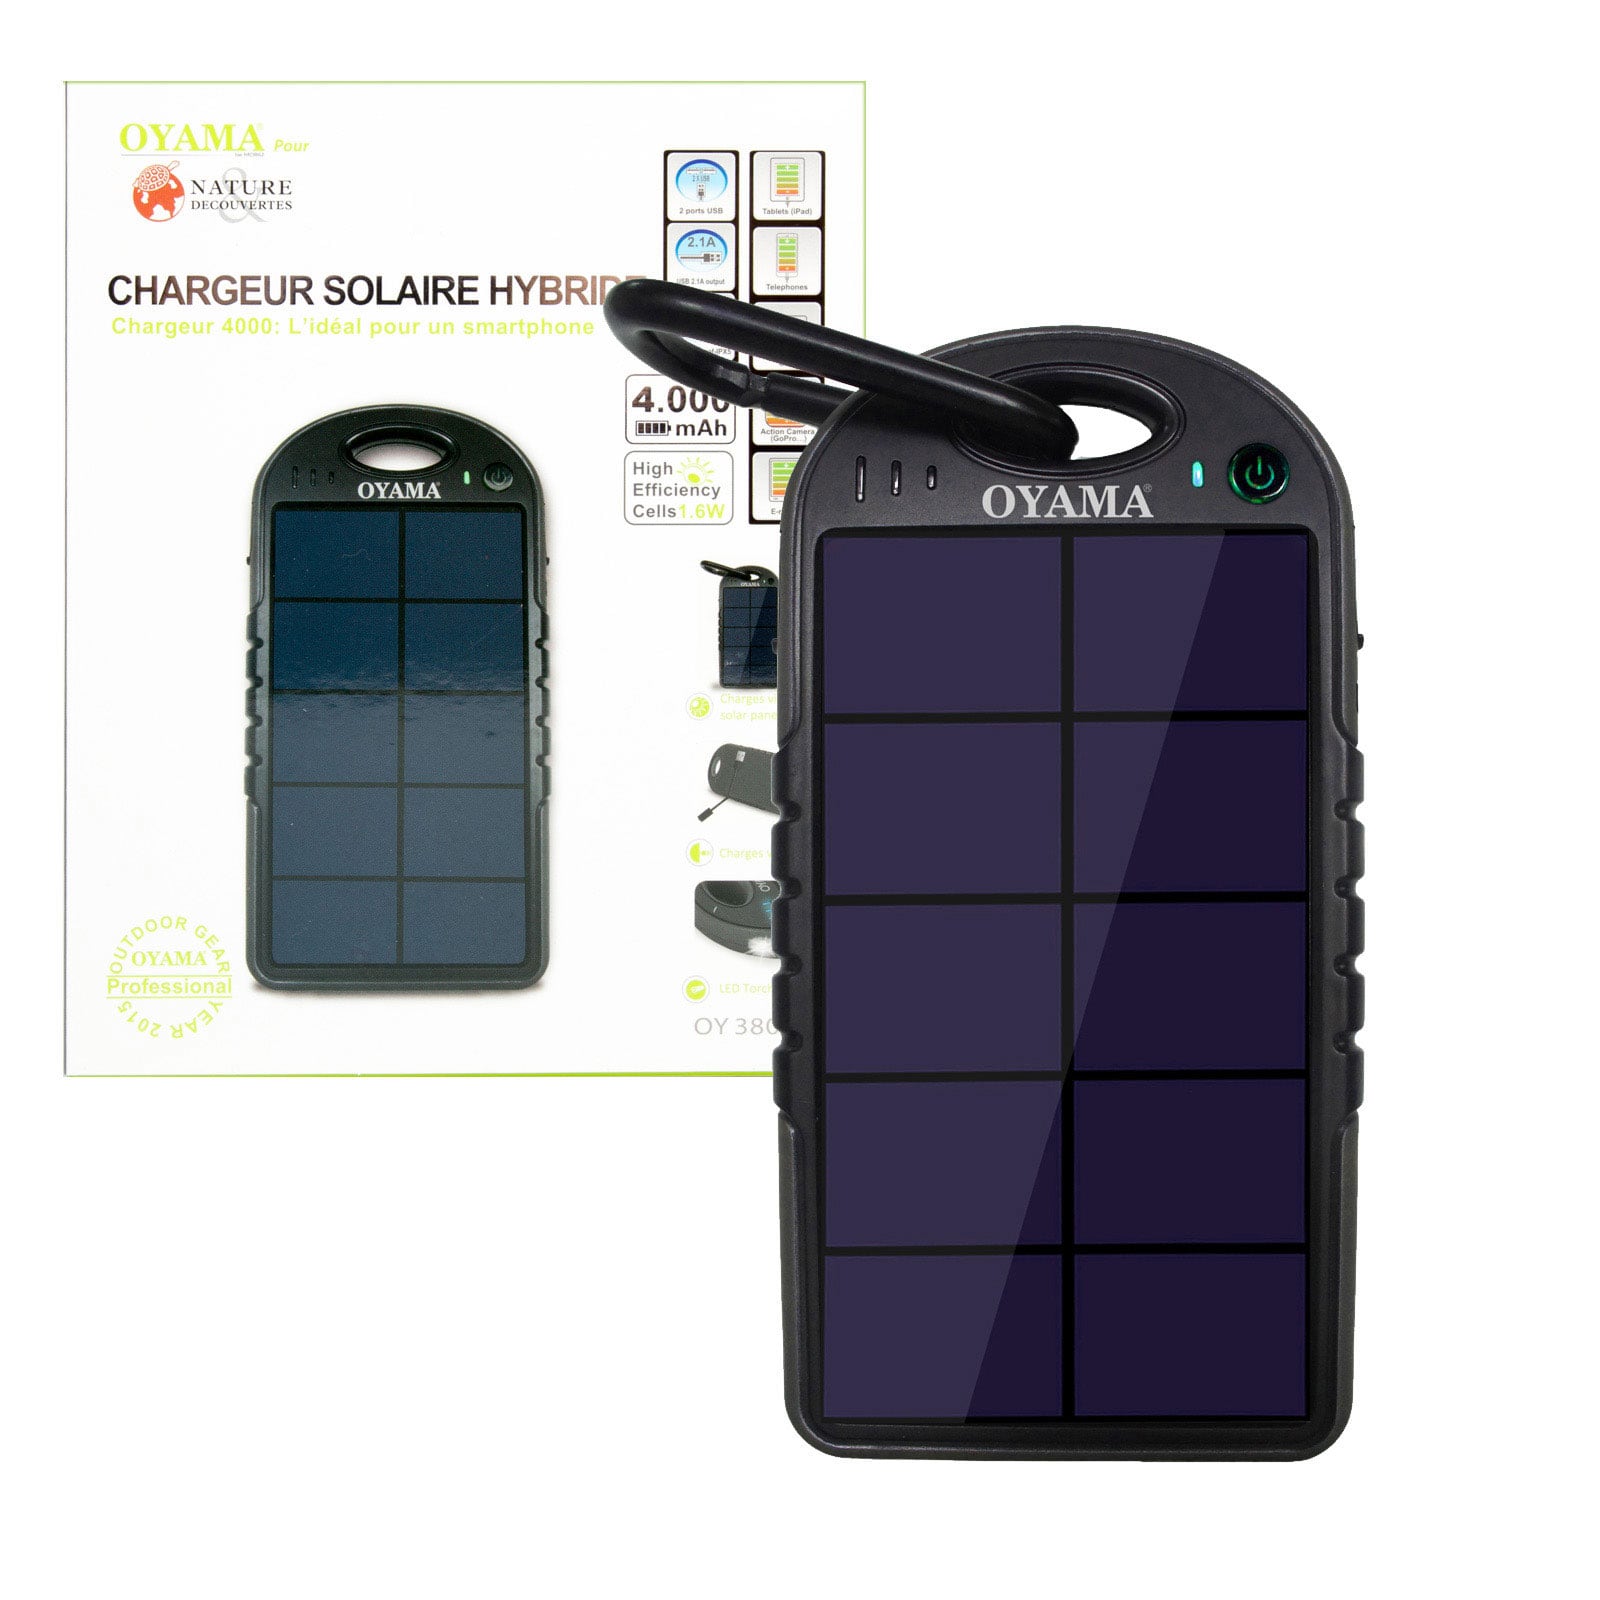 Chargeur solaire hybride